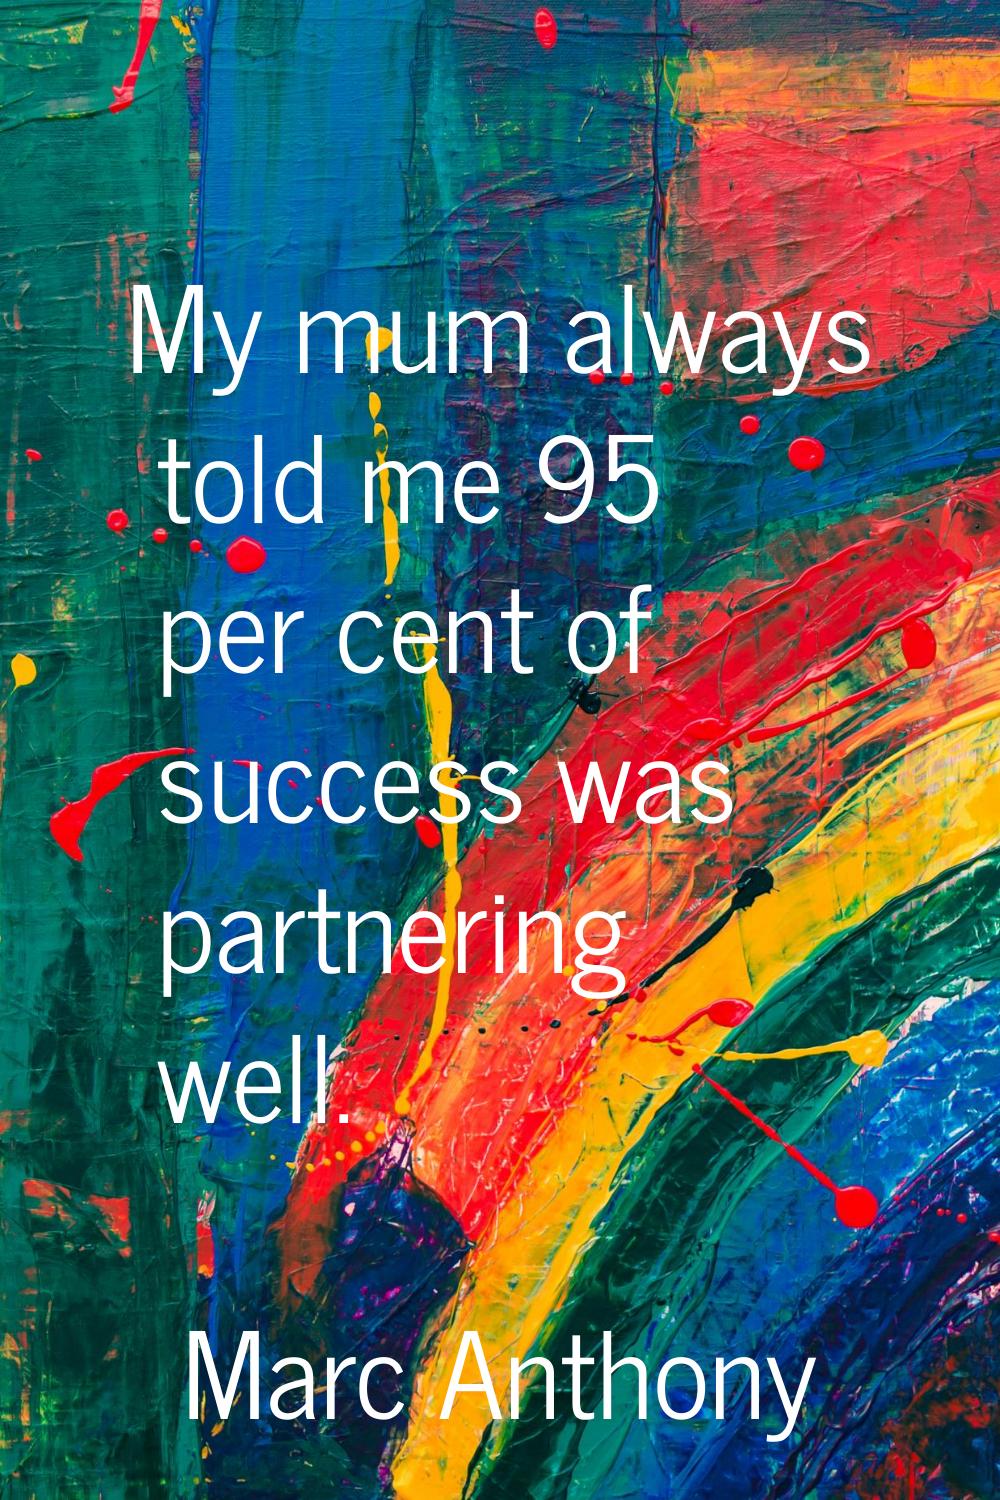 My mum always told me 95 per cent of success was partnering well.